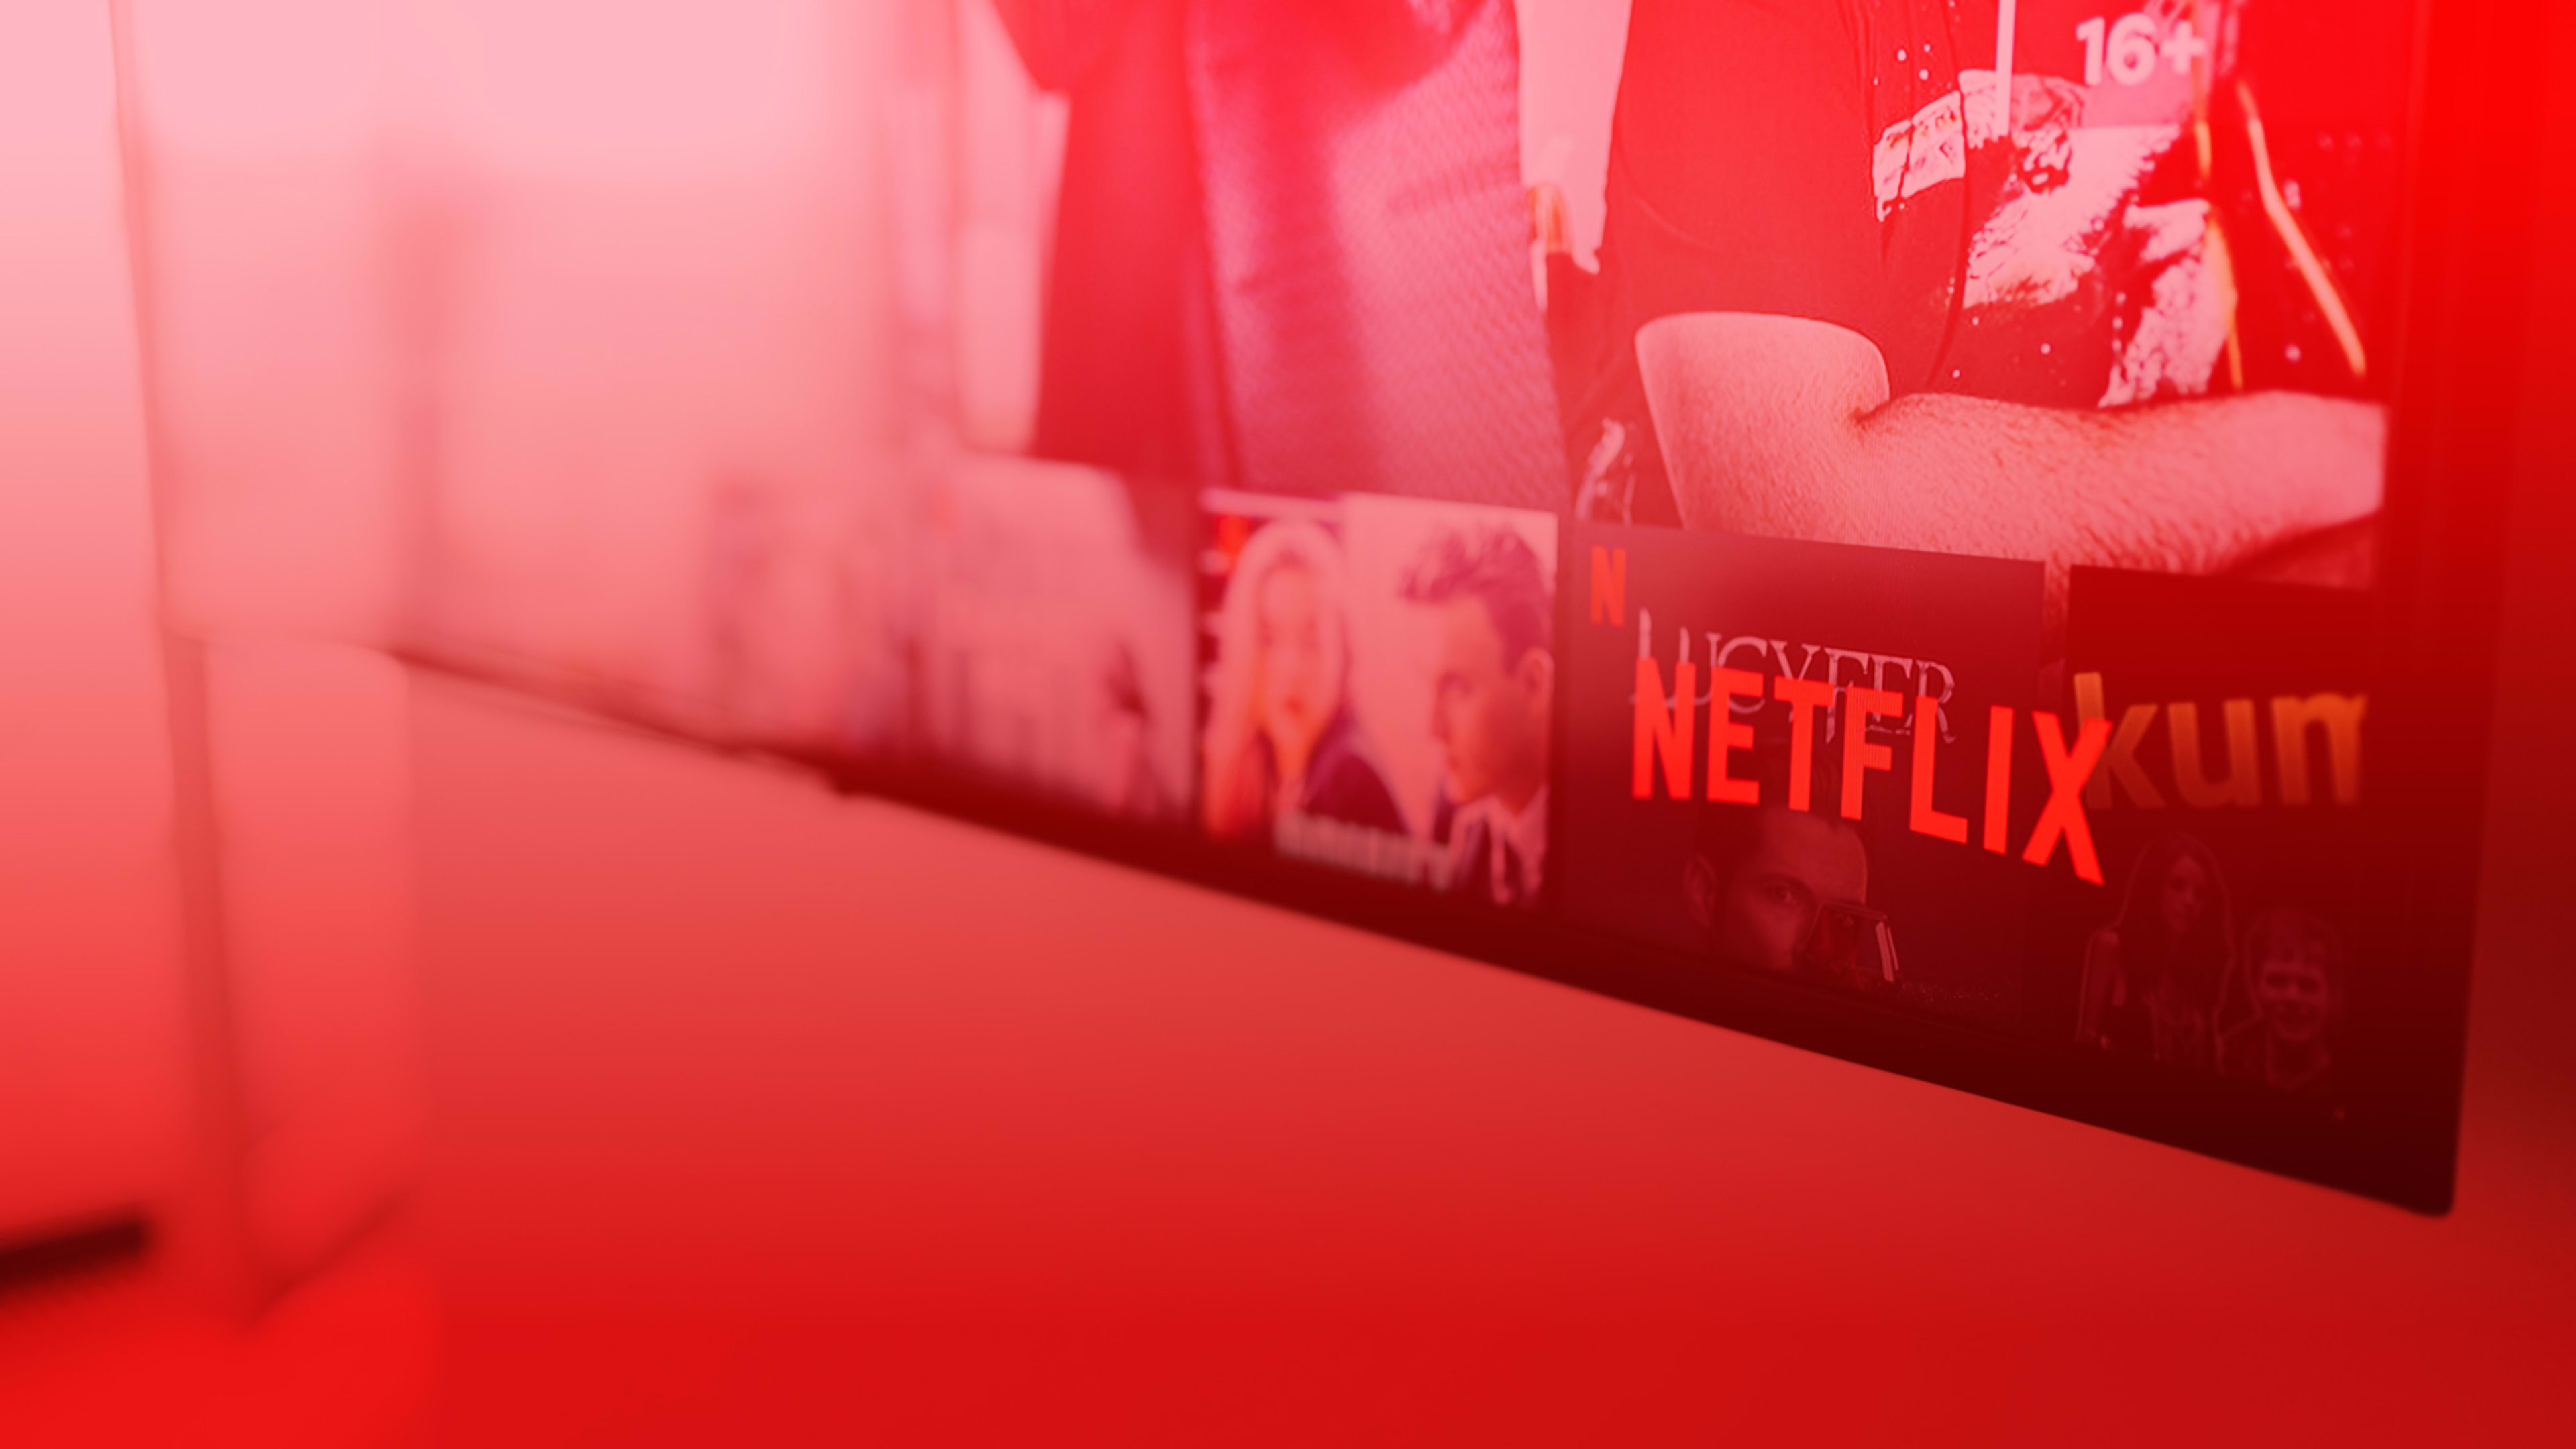 Three easy ways to save on your Netflix subscription